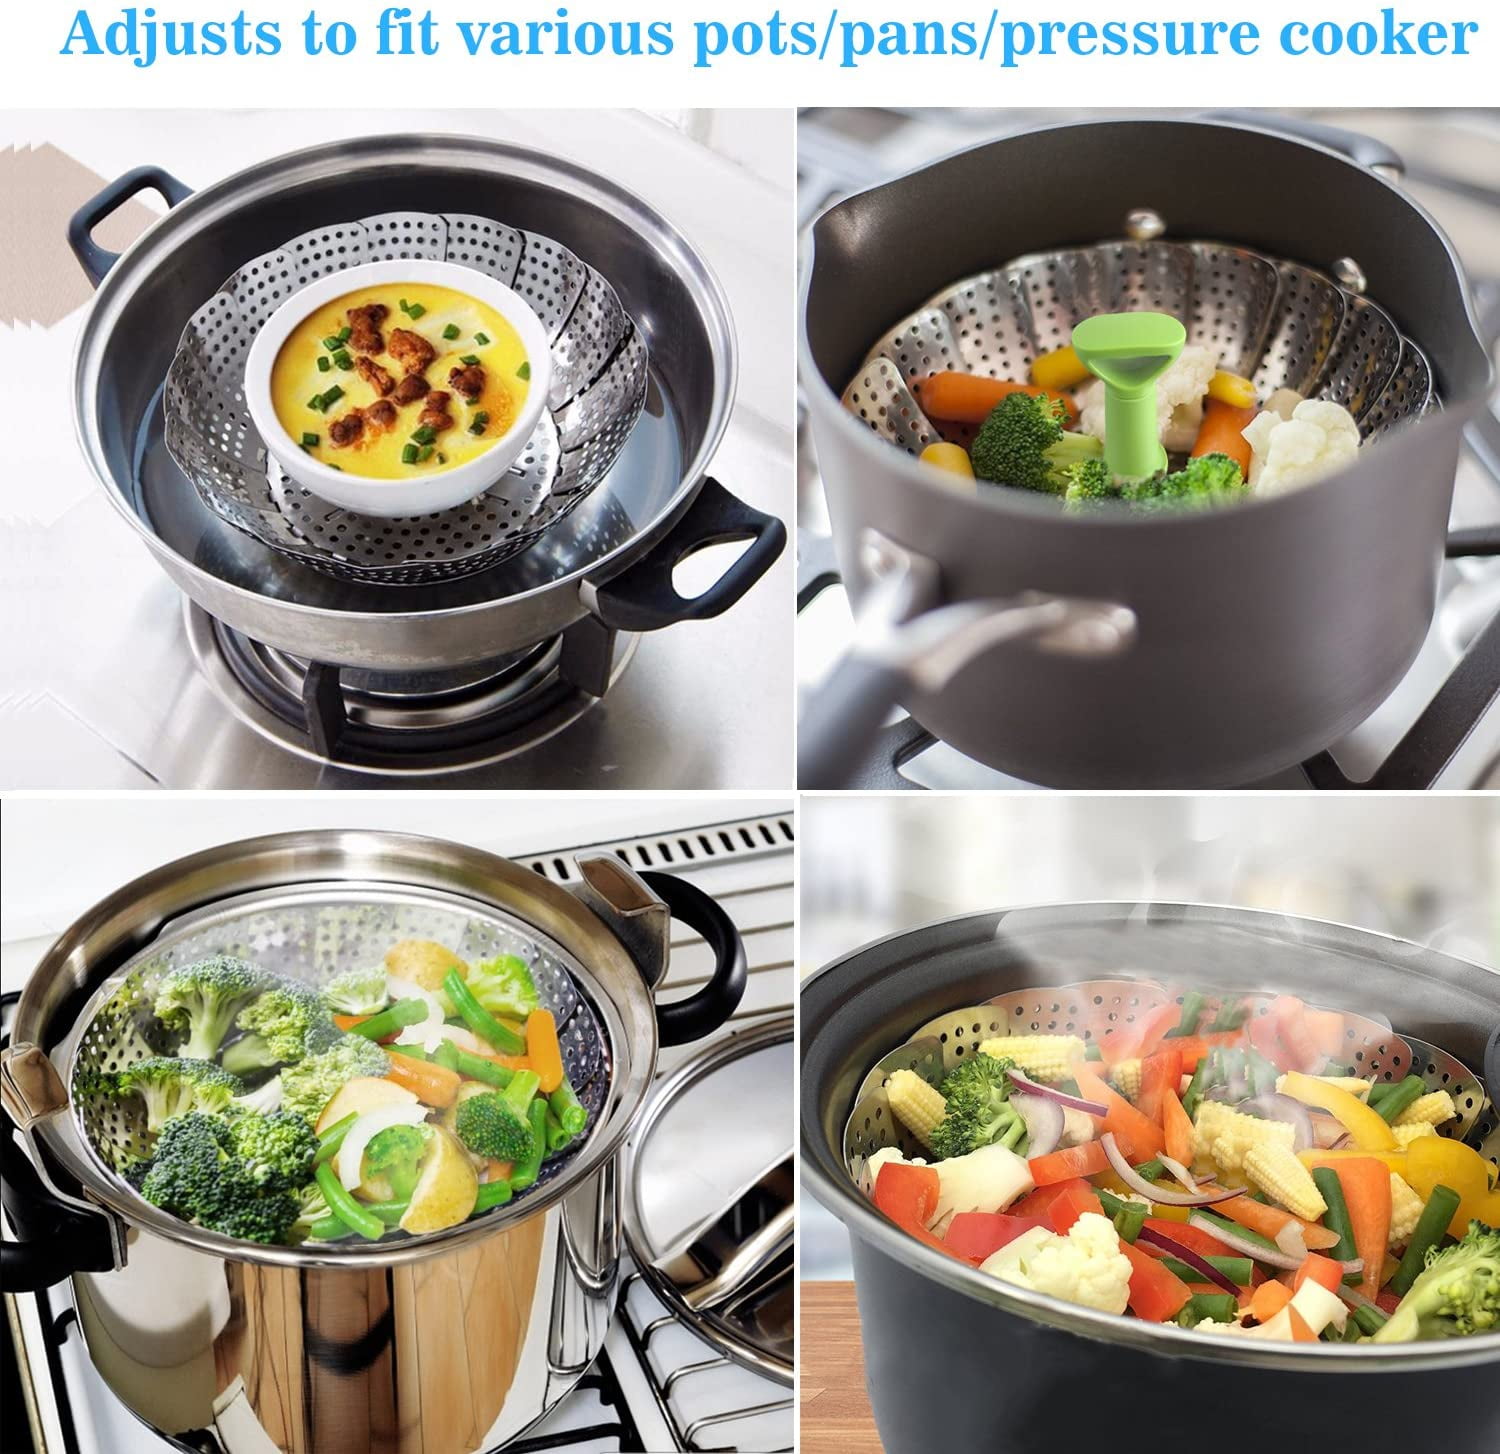 VENTION Steamer Pot for Cooking, Vegetable Steamer, 5-Ply Stainless Steel  Steamer, 7.9 Inch